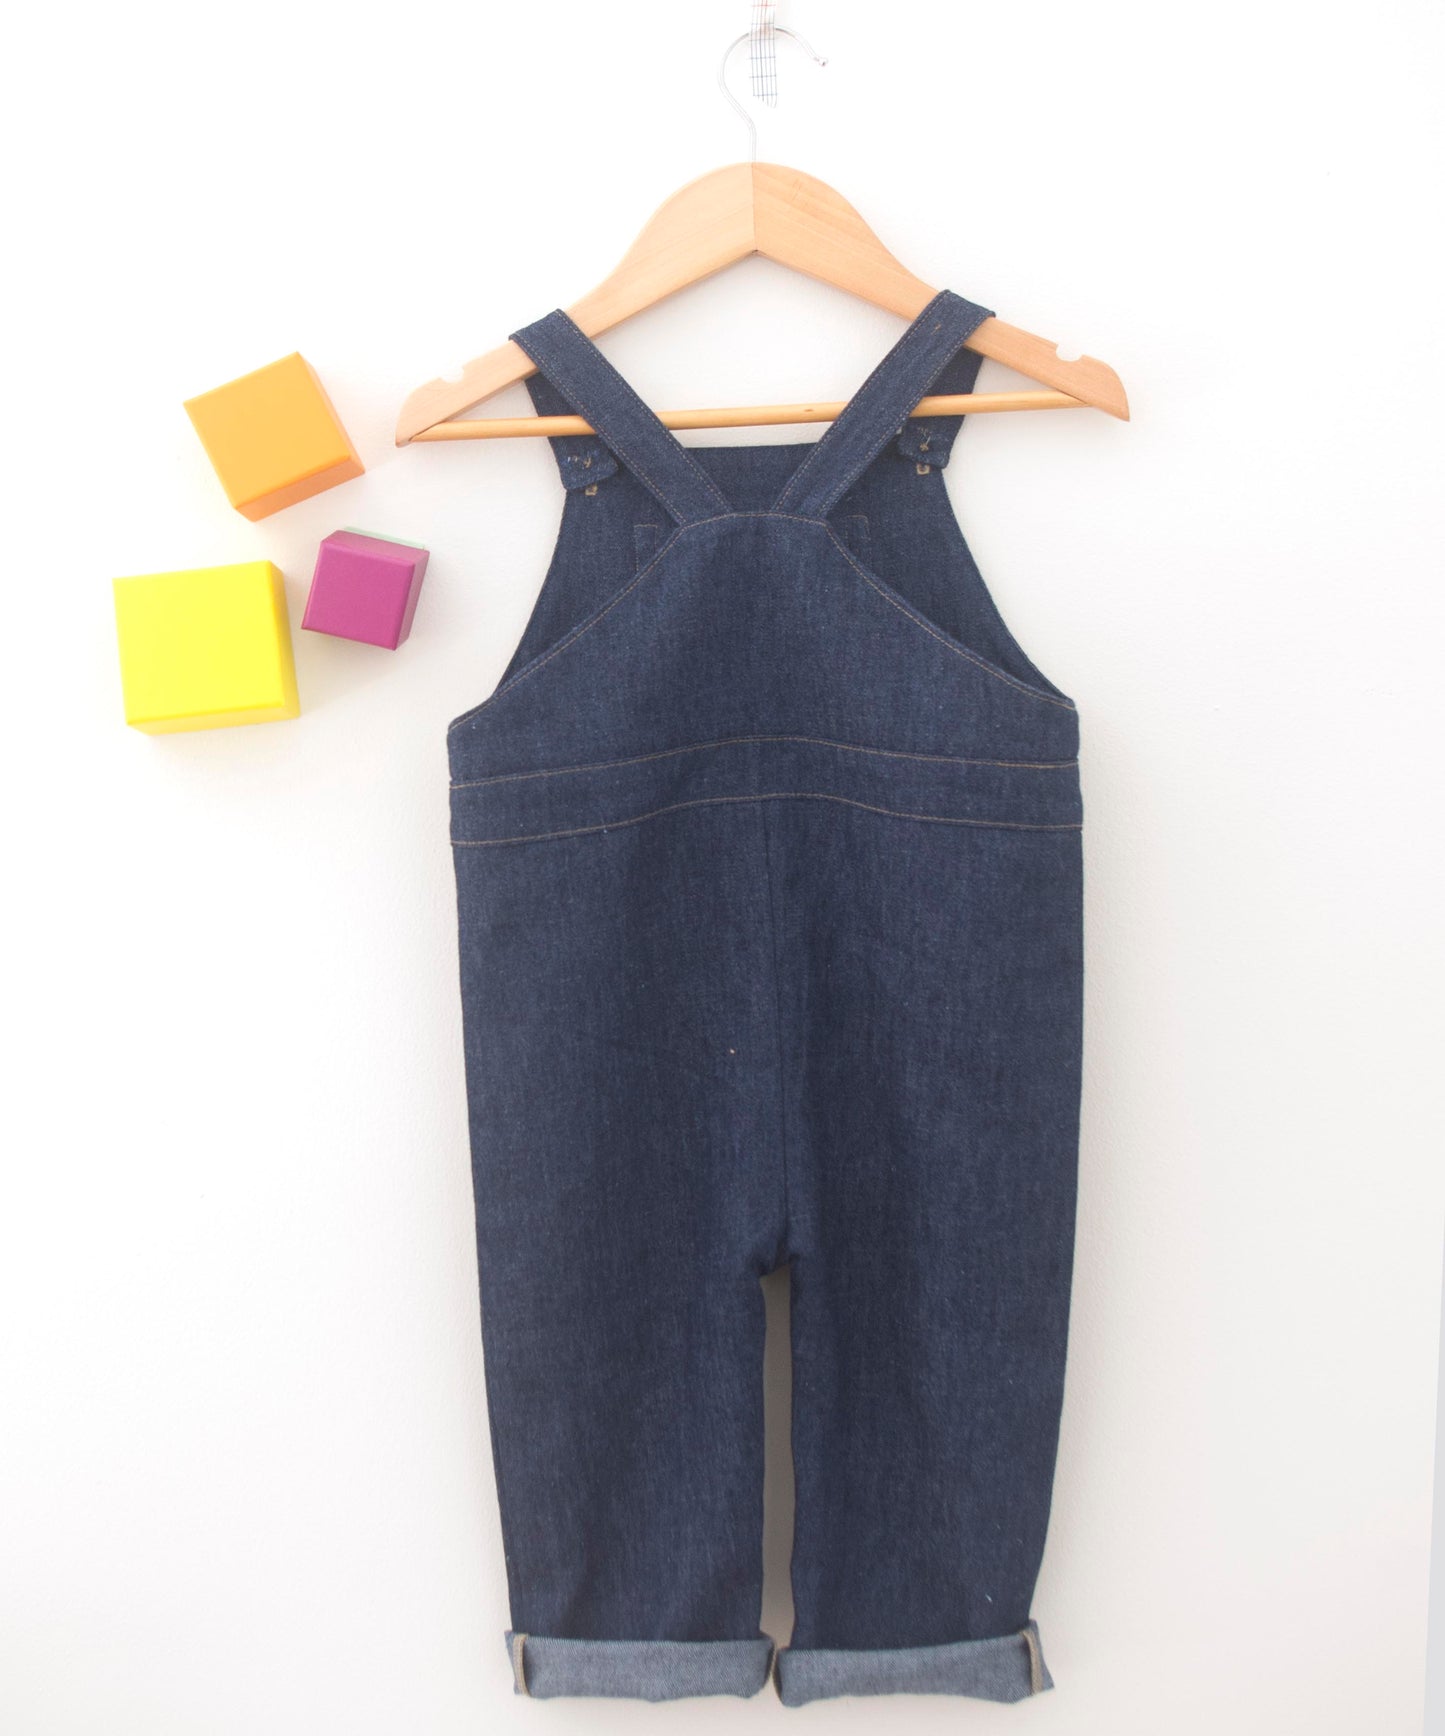 Lion Overalls Sewing Pattern for Kids